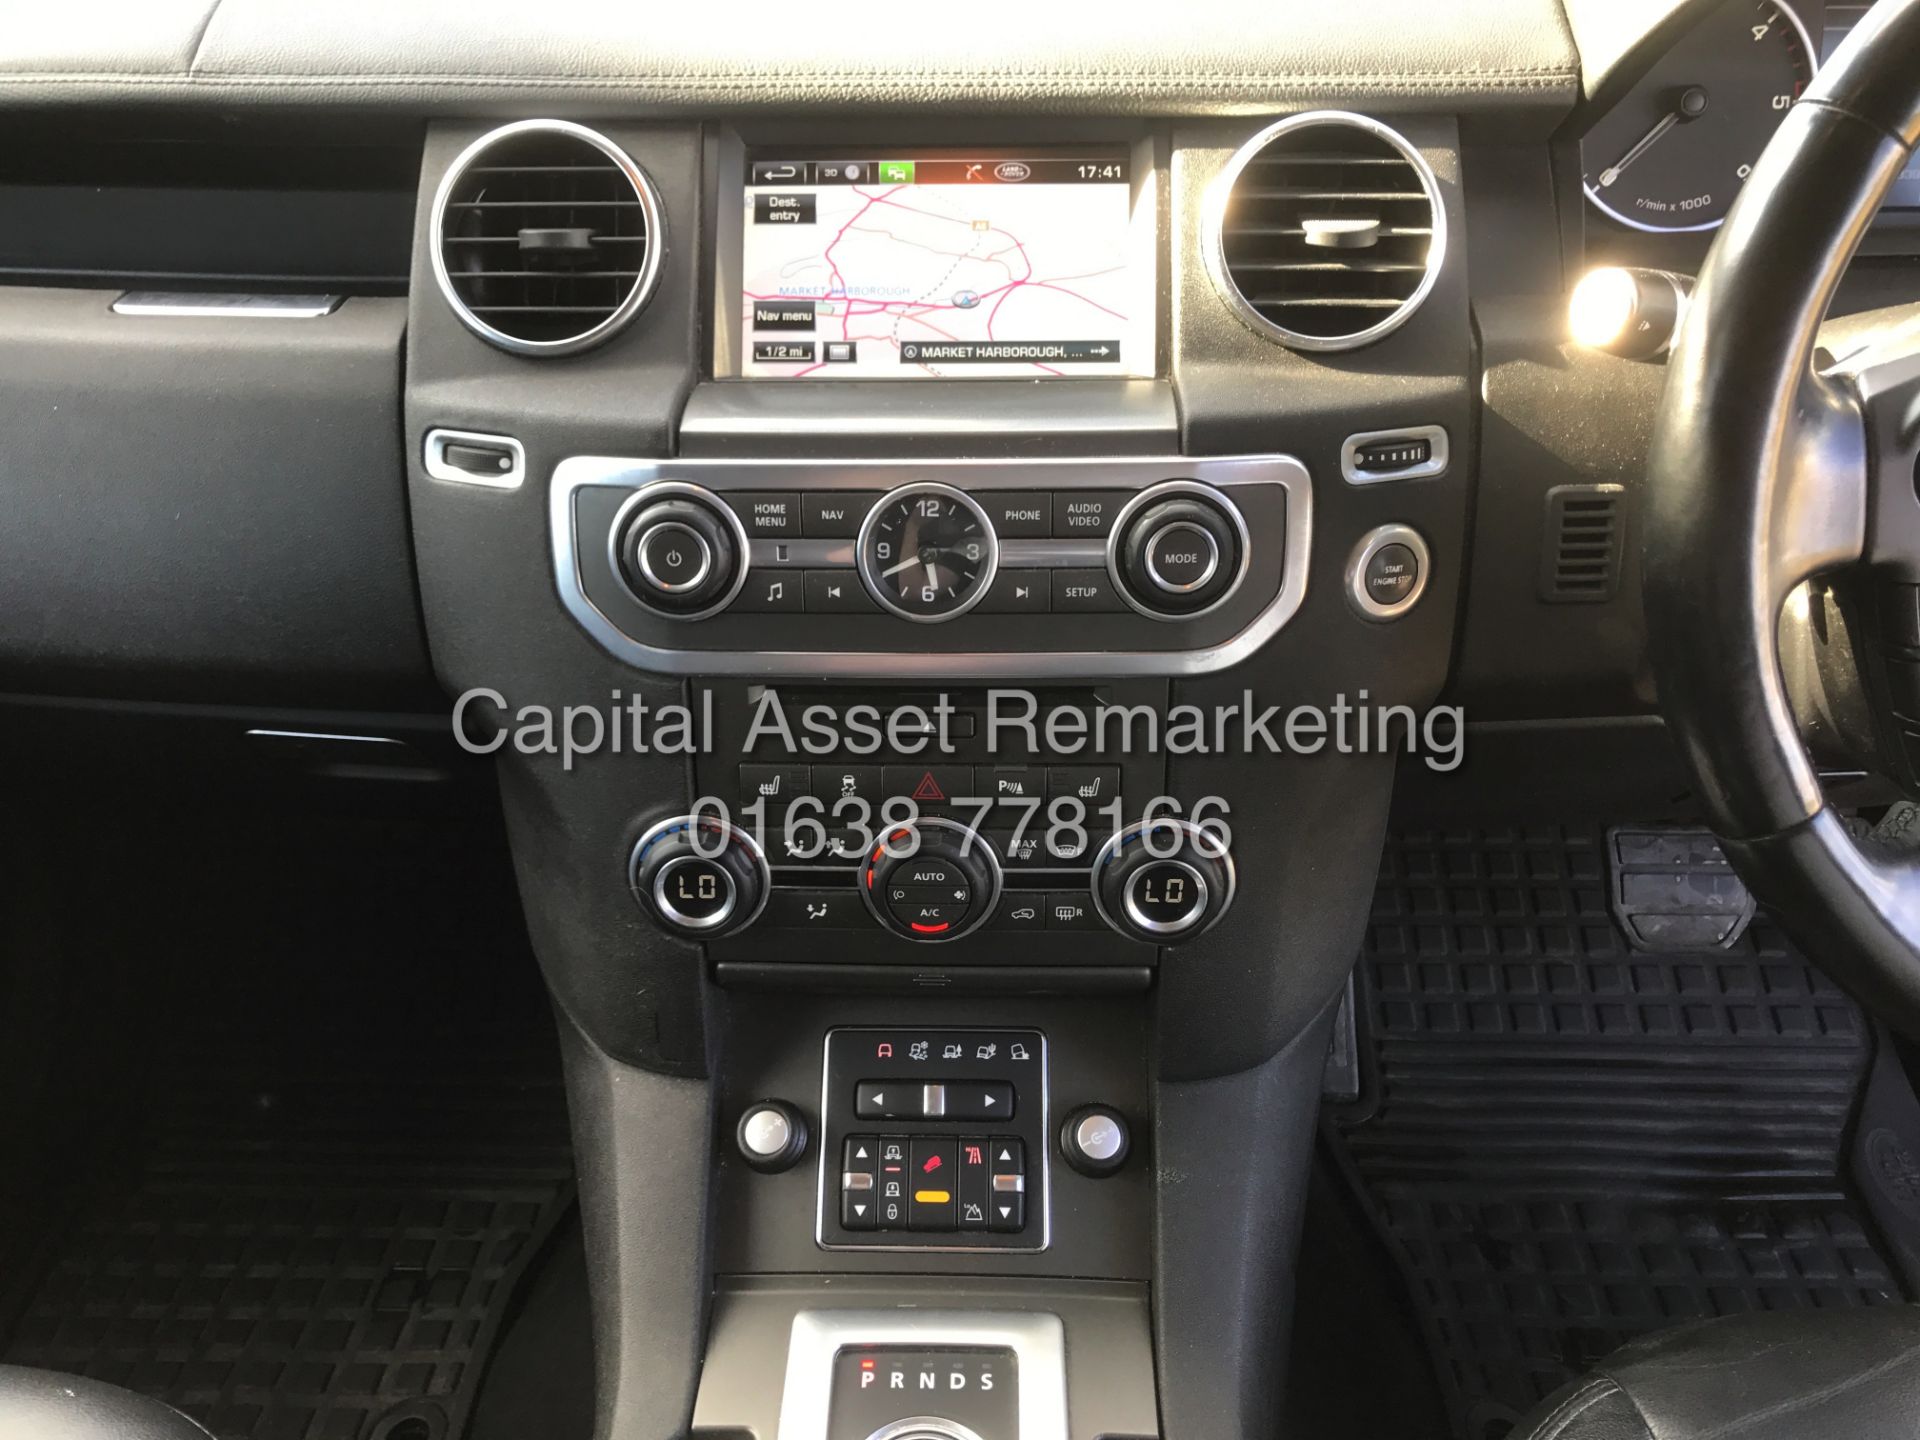 ON SALE LAND ROVER DISCOVERY 4 "3.0SDV6 - AUTO"COMMERCIAL (2014 MODEL) HUGE SPEC - SAT NAV -LEATHER - Image 19 of 31